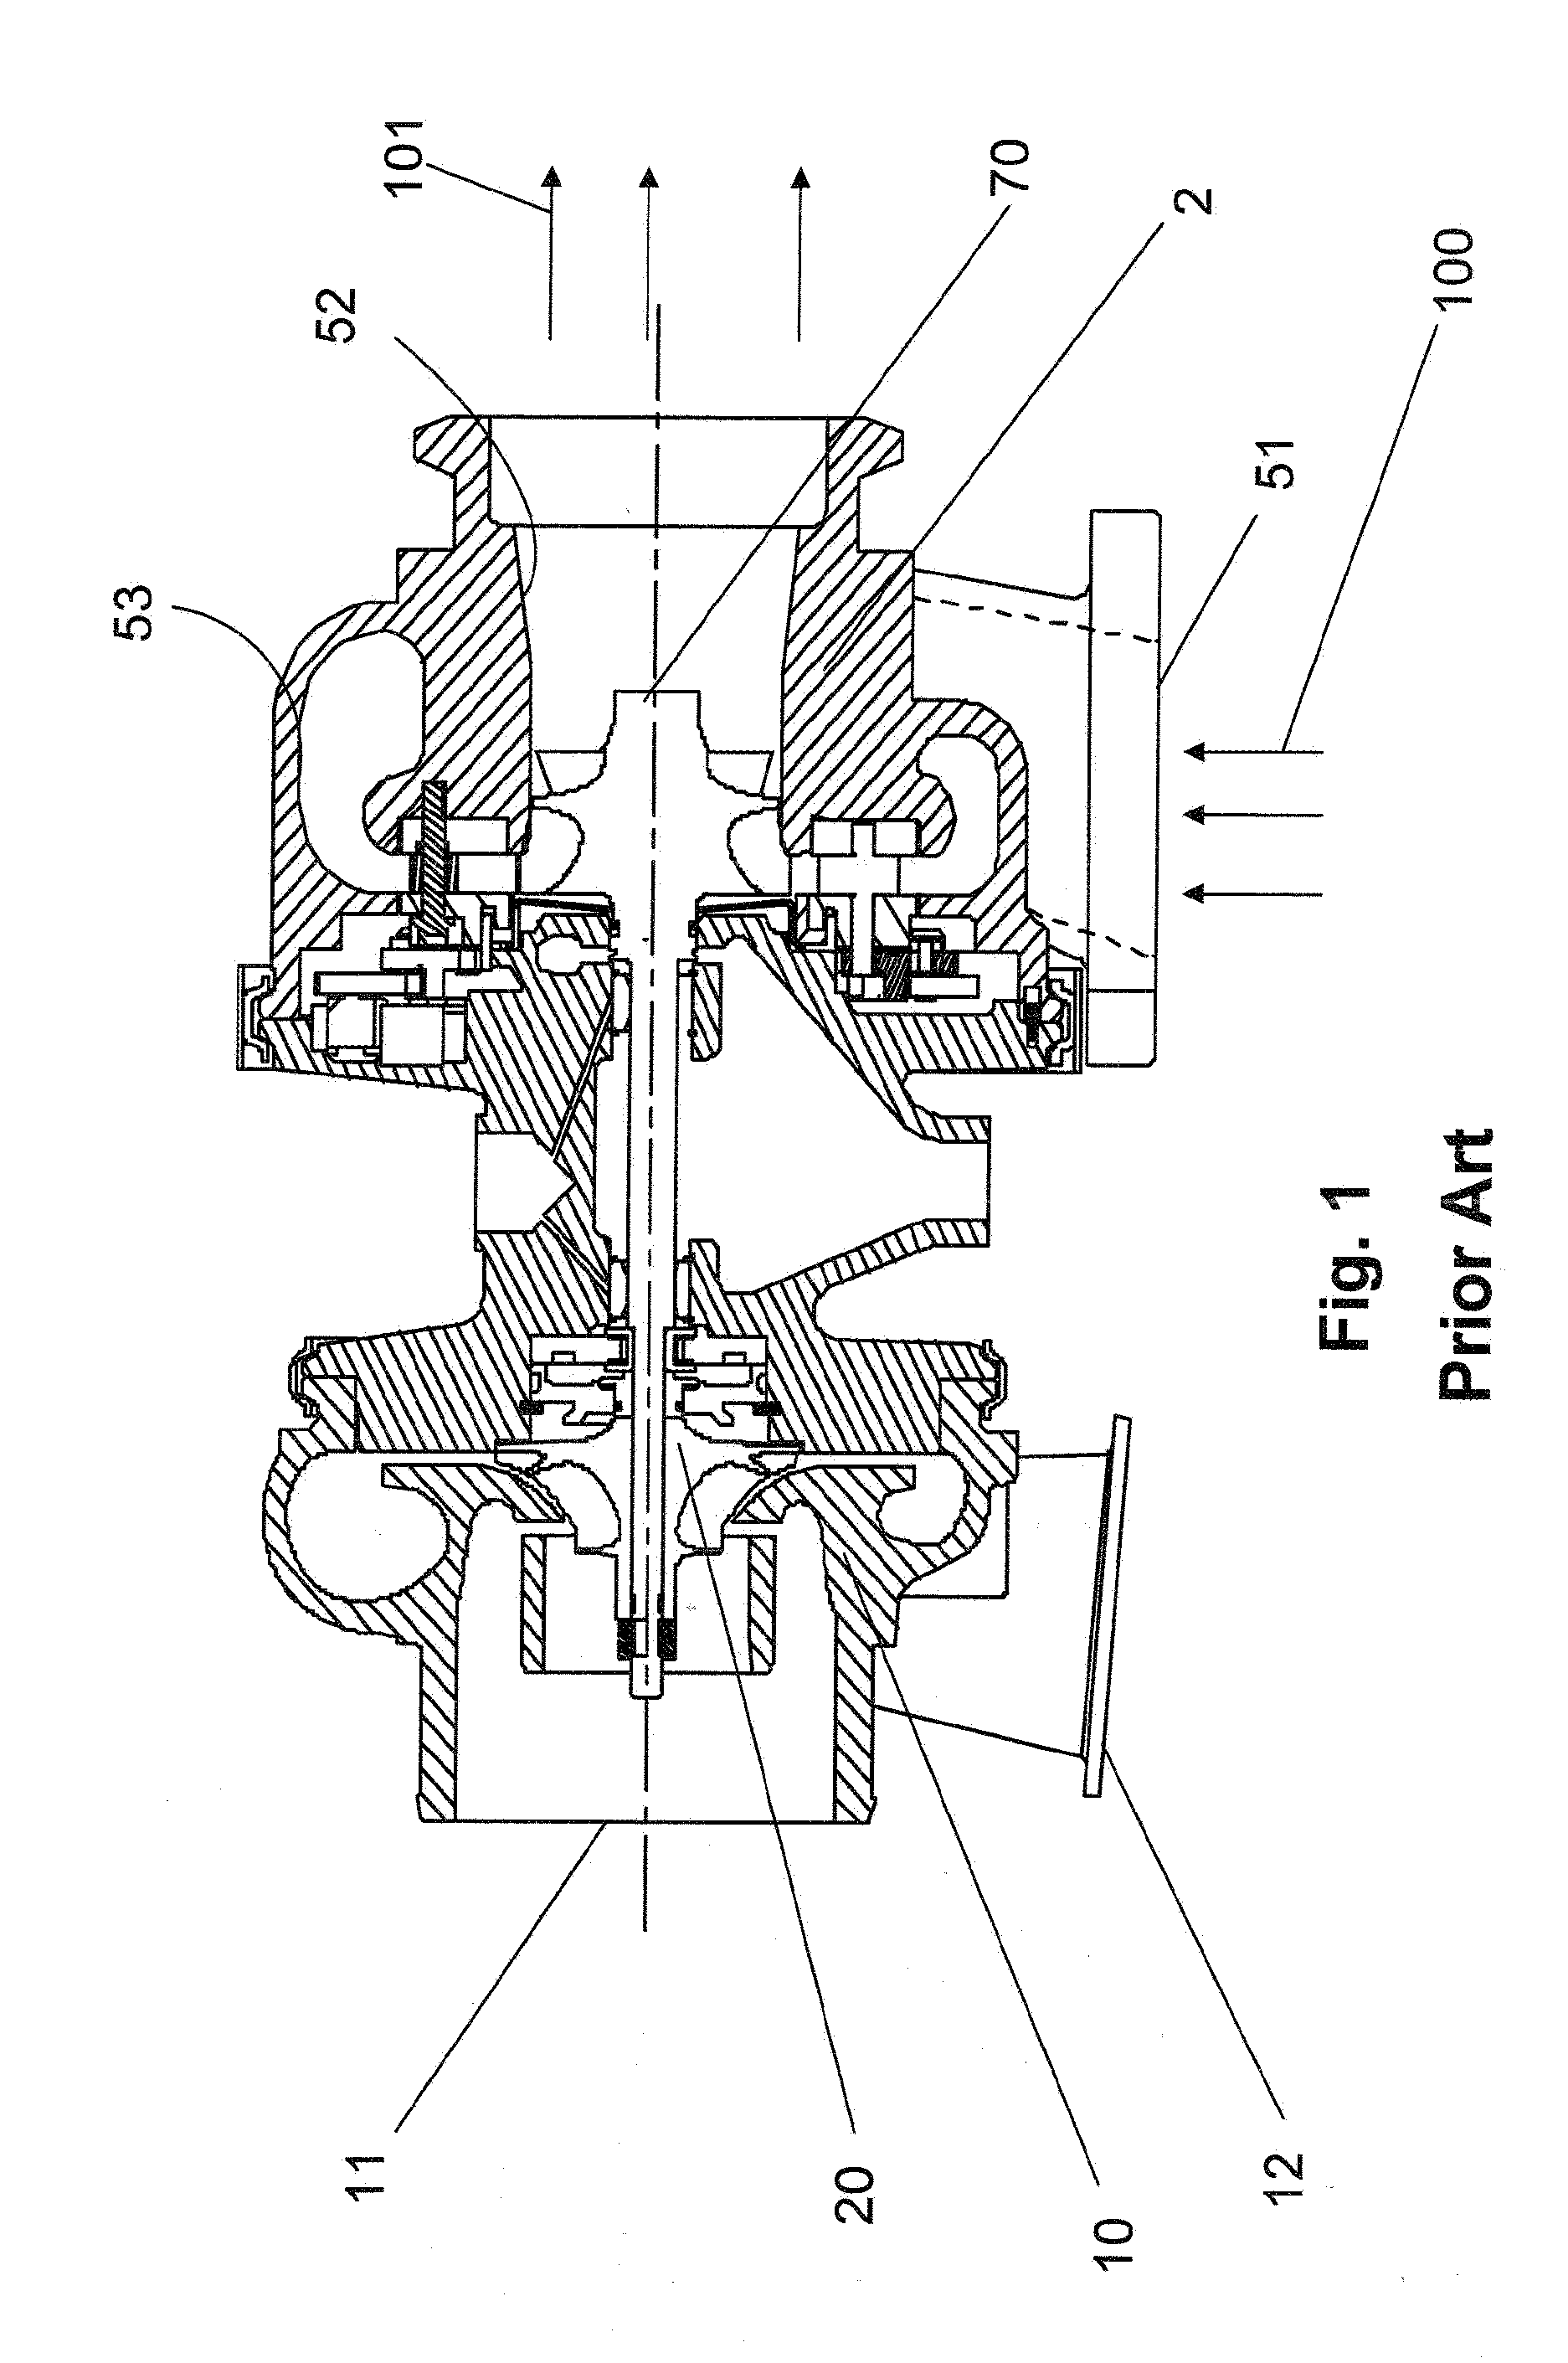 Simplified variable geometry turbocharger with vane rings